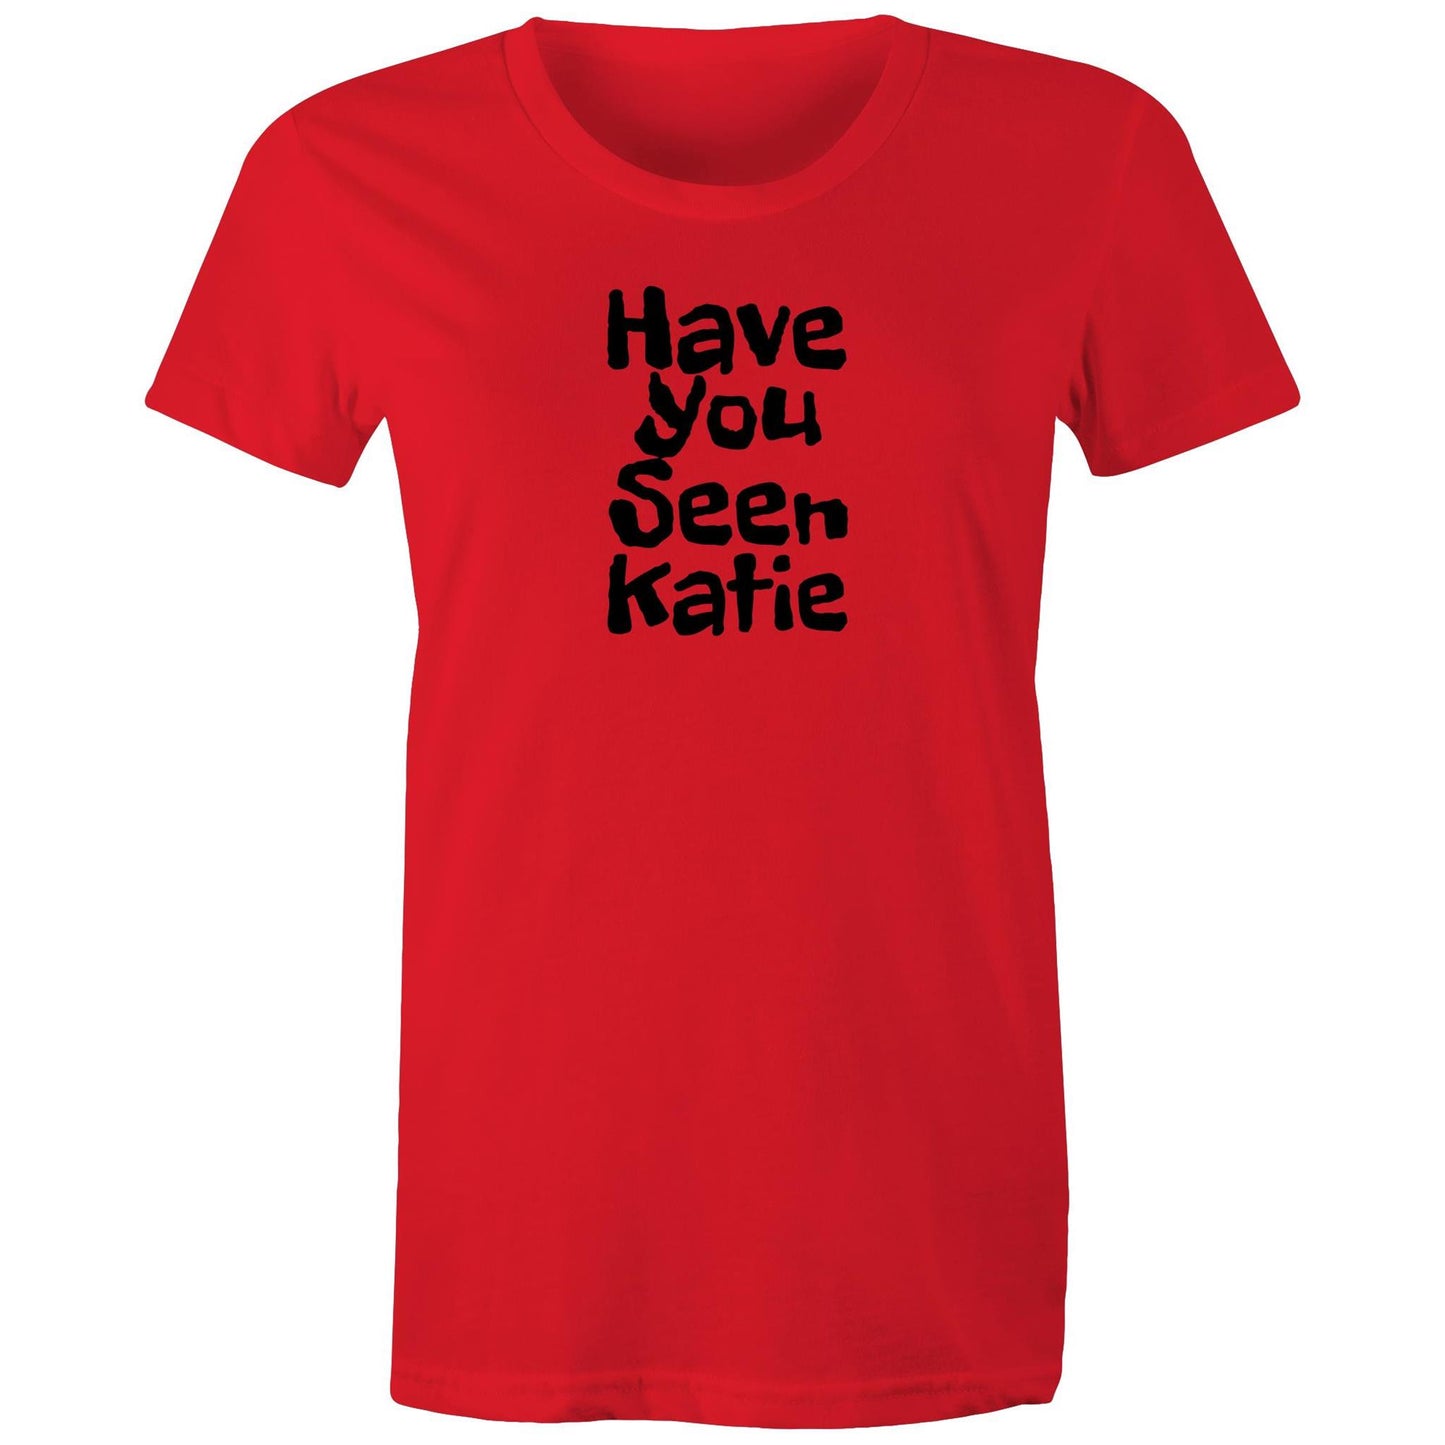 Have You Seen Katie Womens TShirt